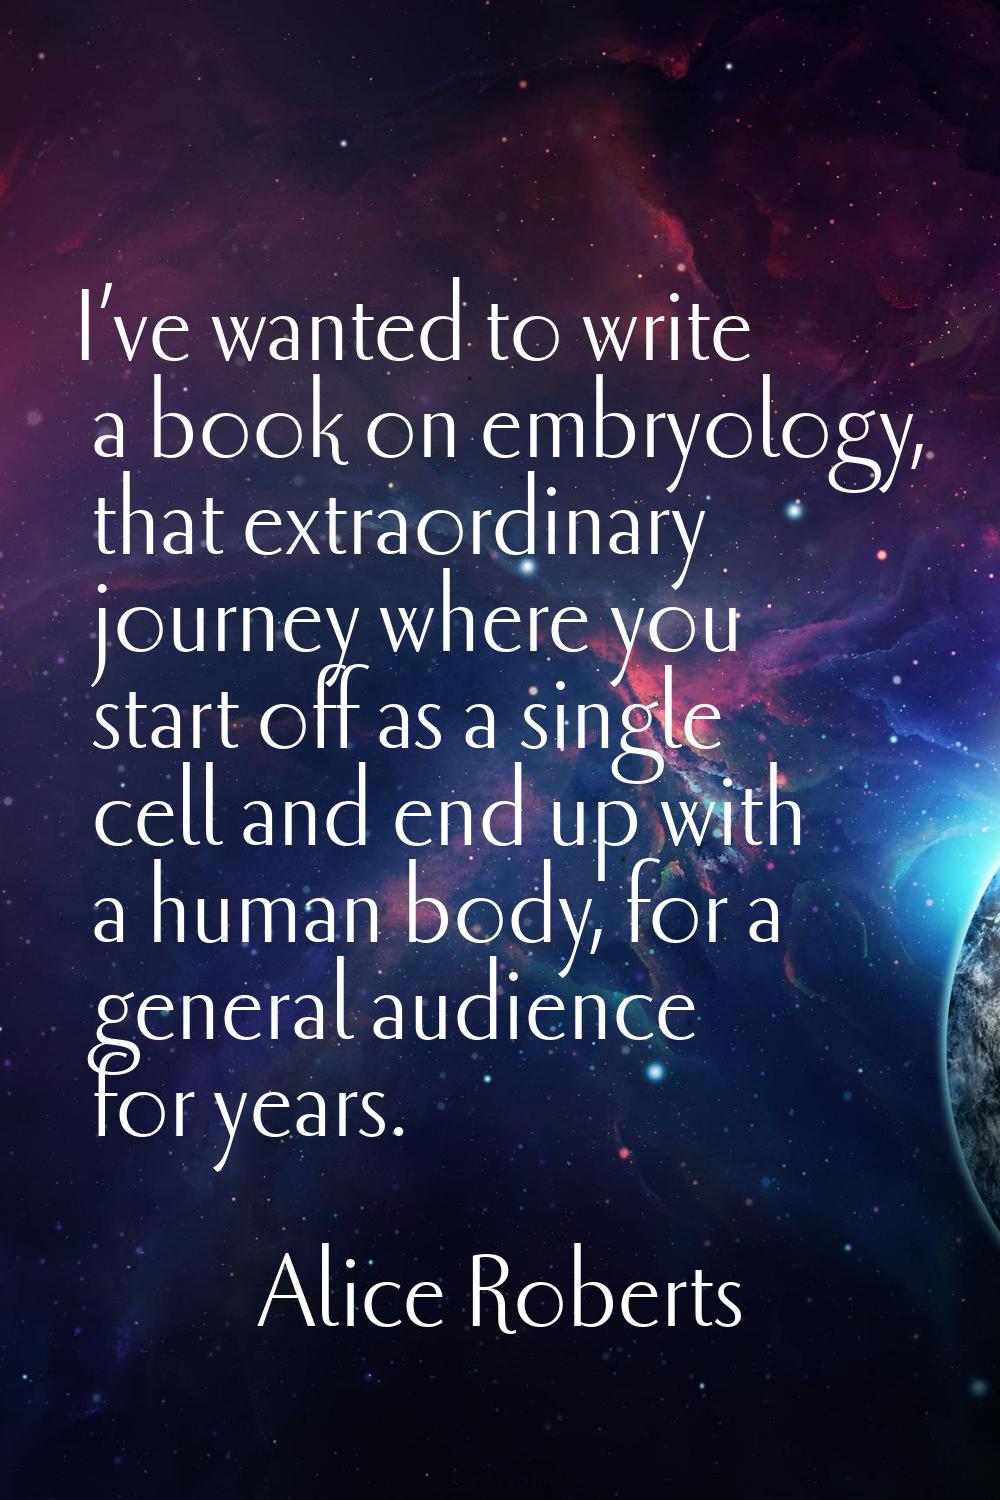 I’ve wanted to write a book on embryology, that extraordinary journey where you start off as a sing